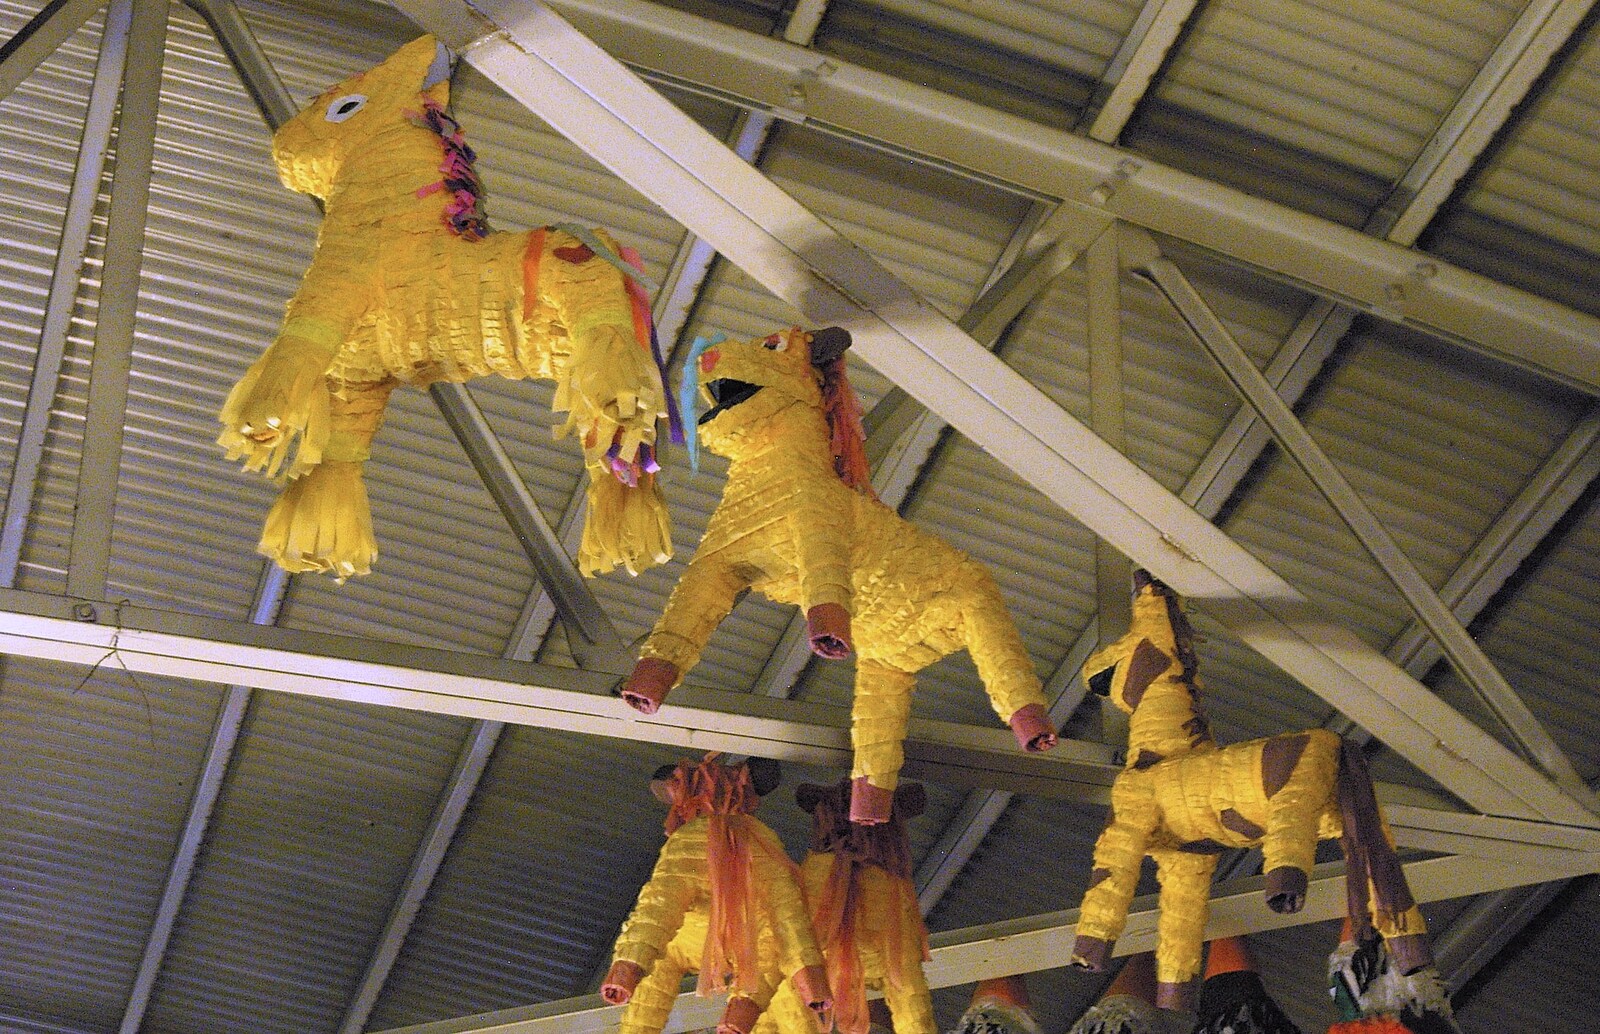 Piñatas hang from the bus-station ceiling from A Trip to Tijuana, Mexico - 25th March 2006